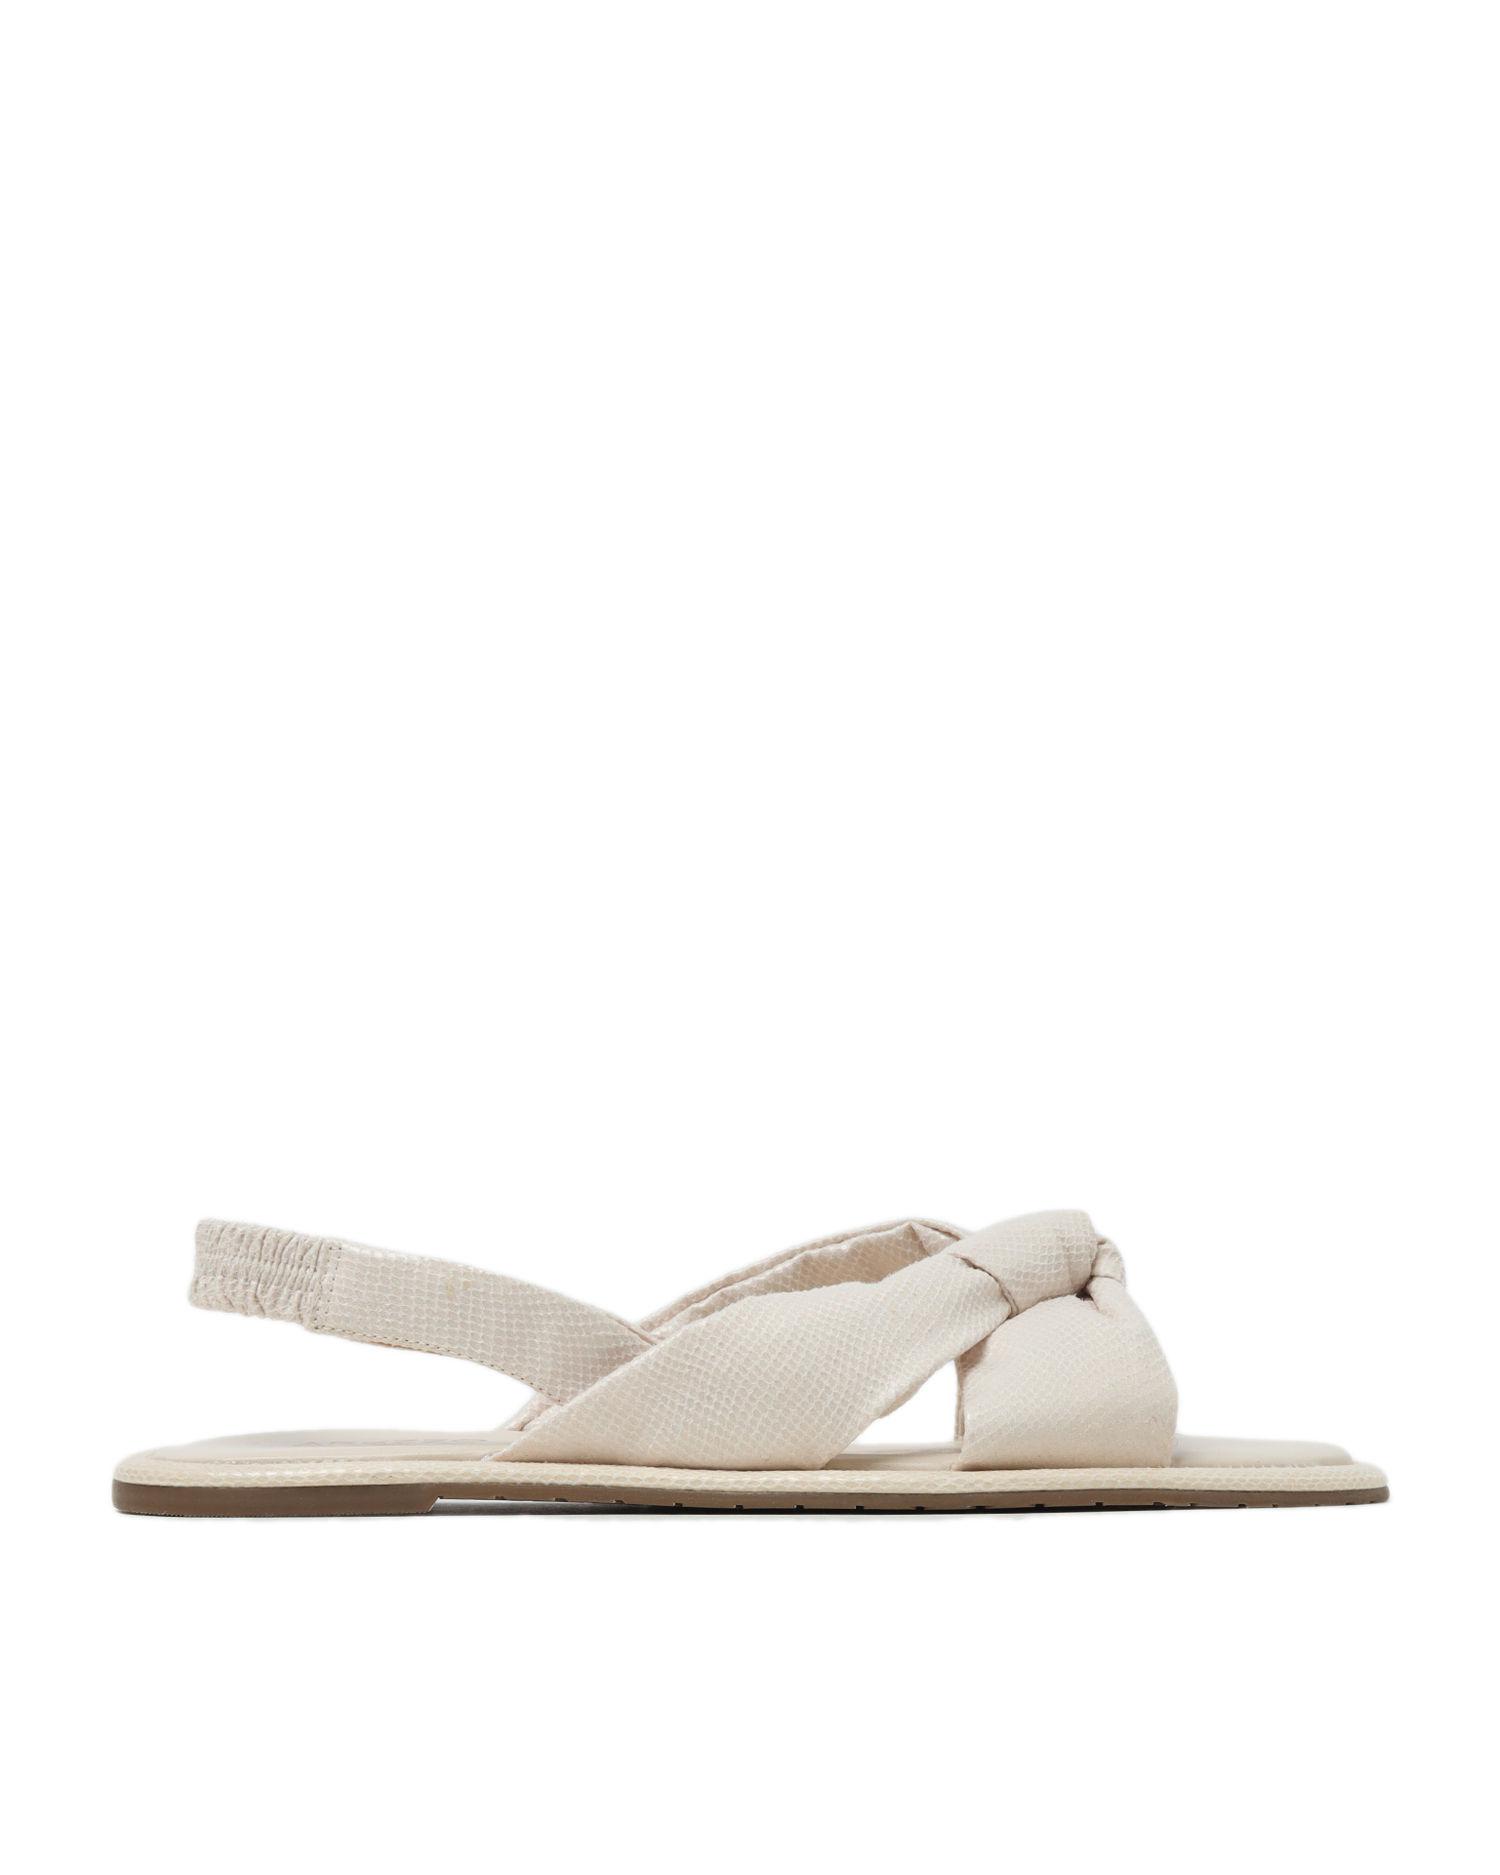 Knot sandals by AREZZO